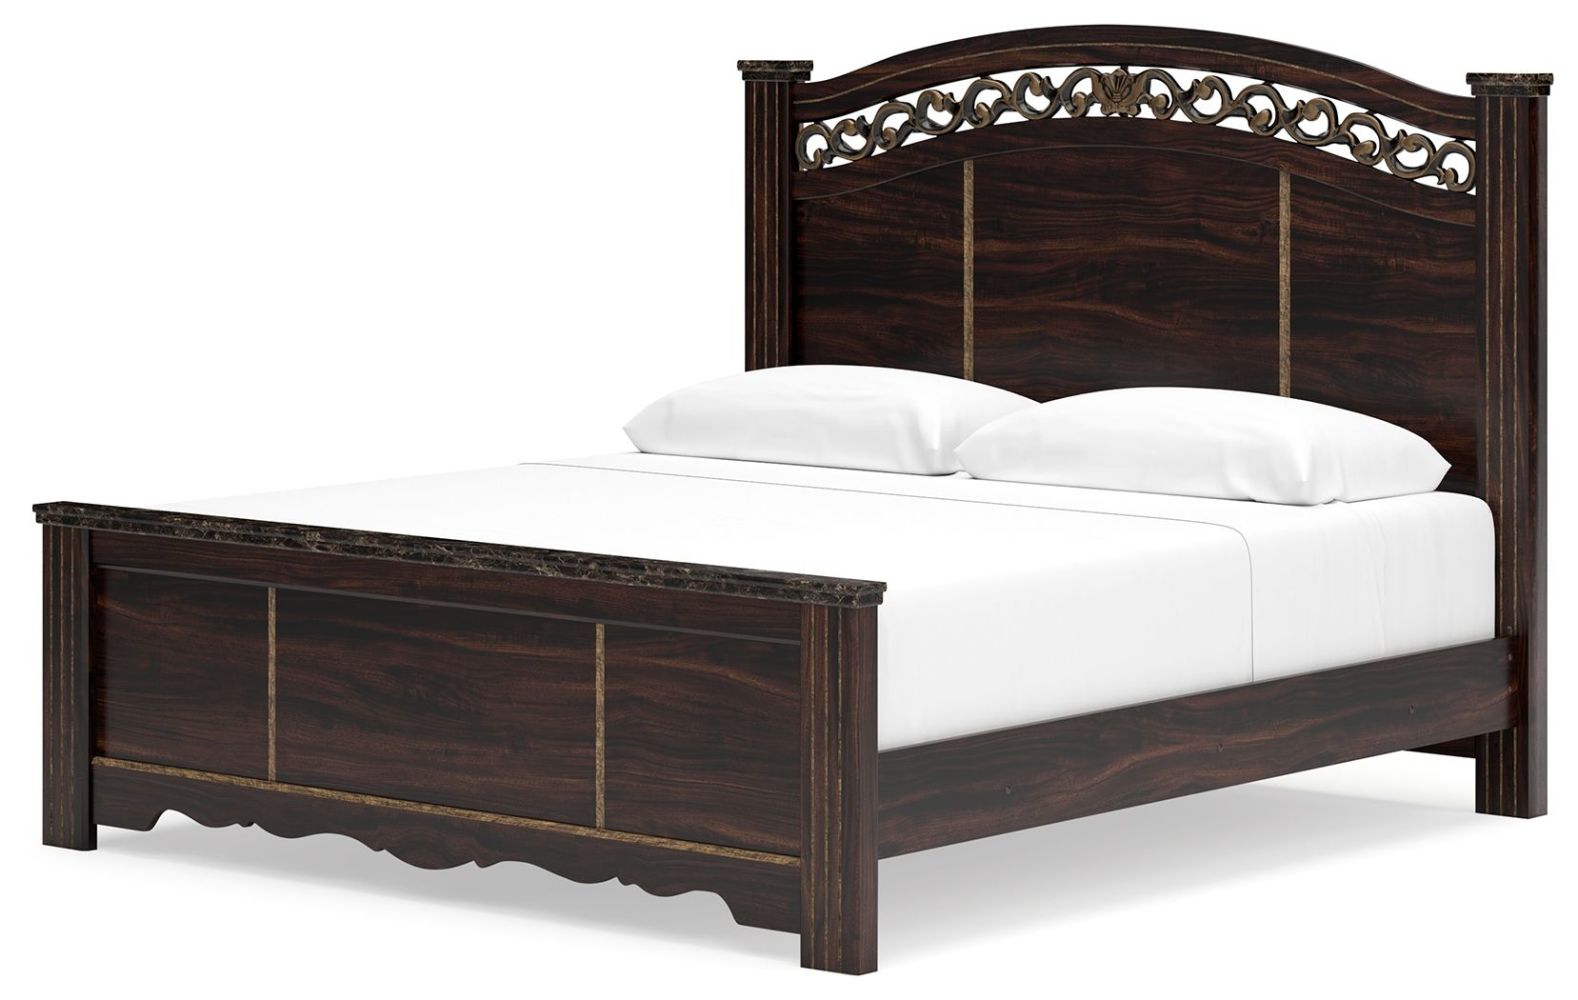 Glosmount – Two-tone- 7 Pc. – Dresser, Mirror, King Poster Bed, 2 Nightstands B1055/231/36/68/66/97/92(2)